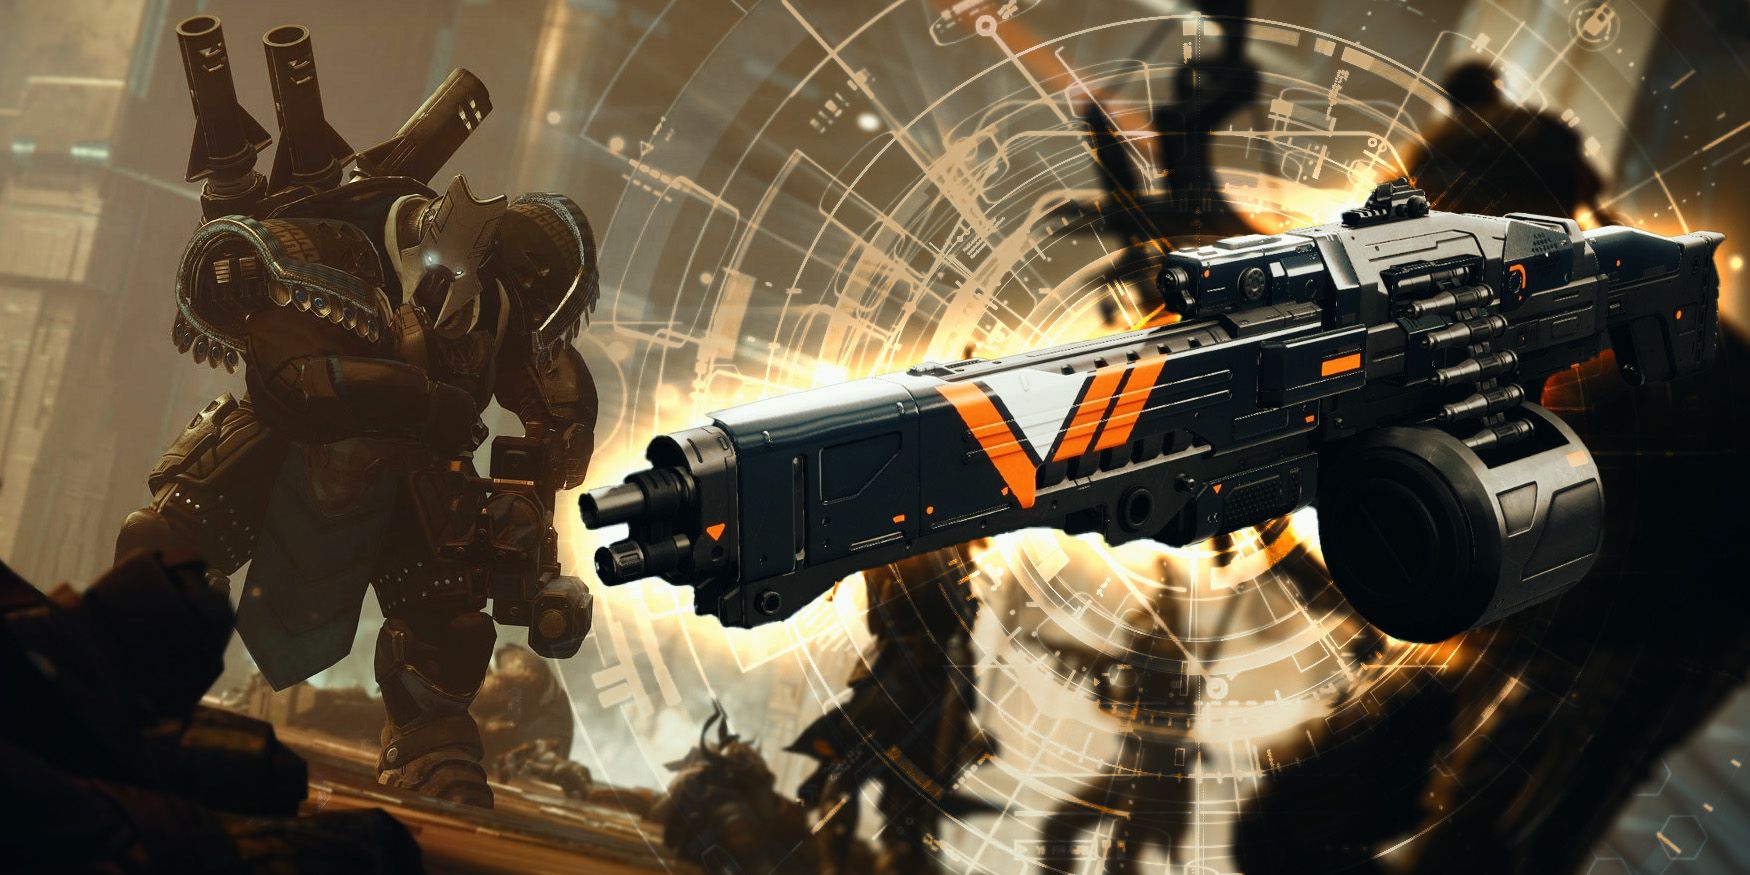 Destiny 2's The SWARM Machine Gun superimposed to the left, over an image of Guardians facing a Cabal boss.